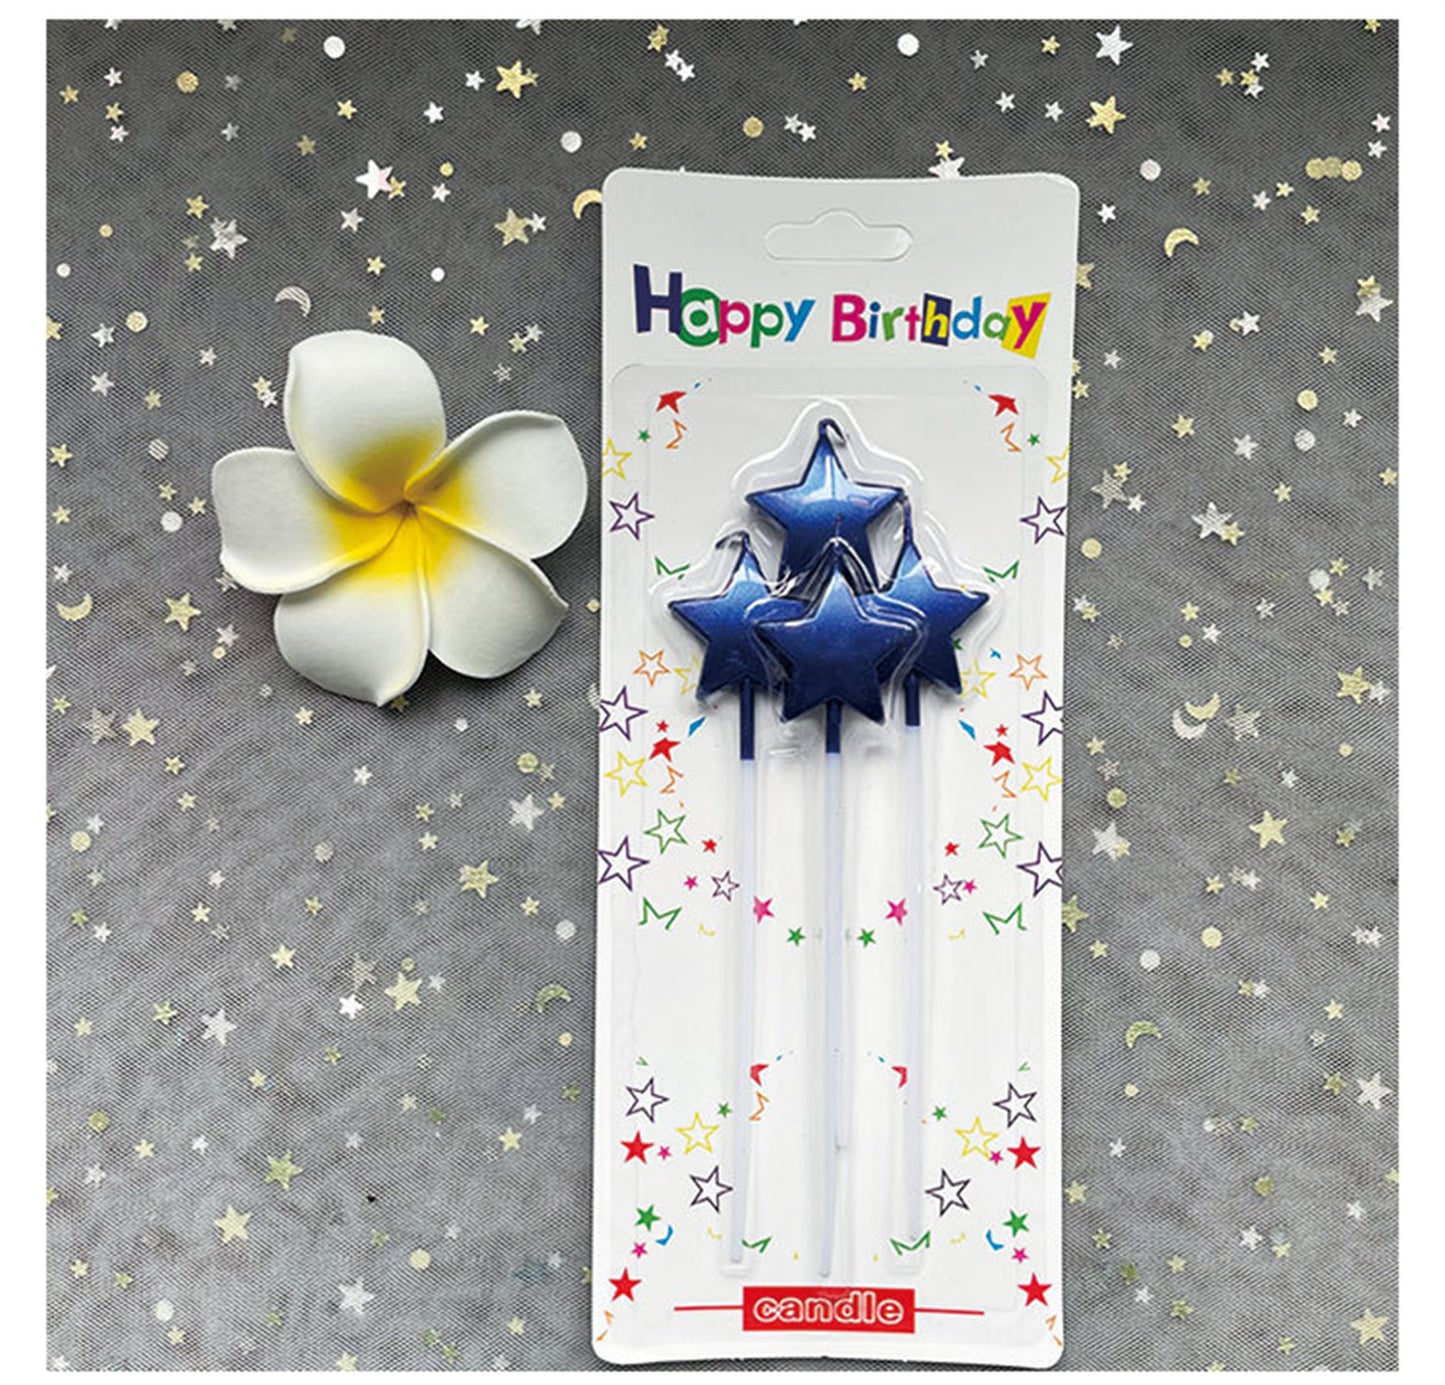 Long Rod star love candle